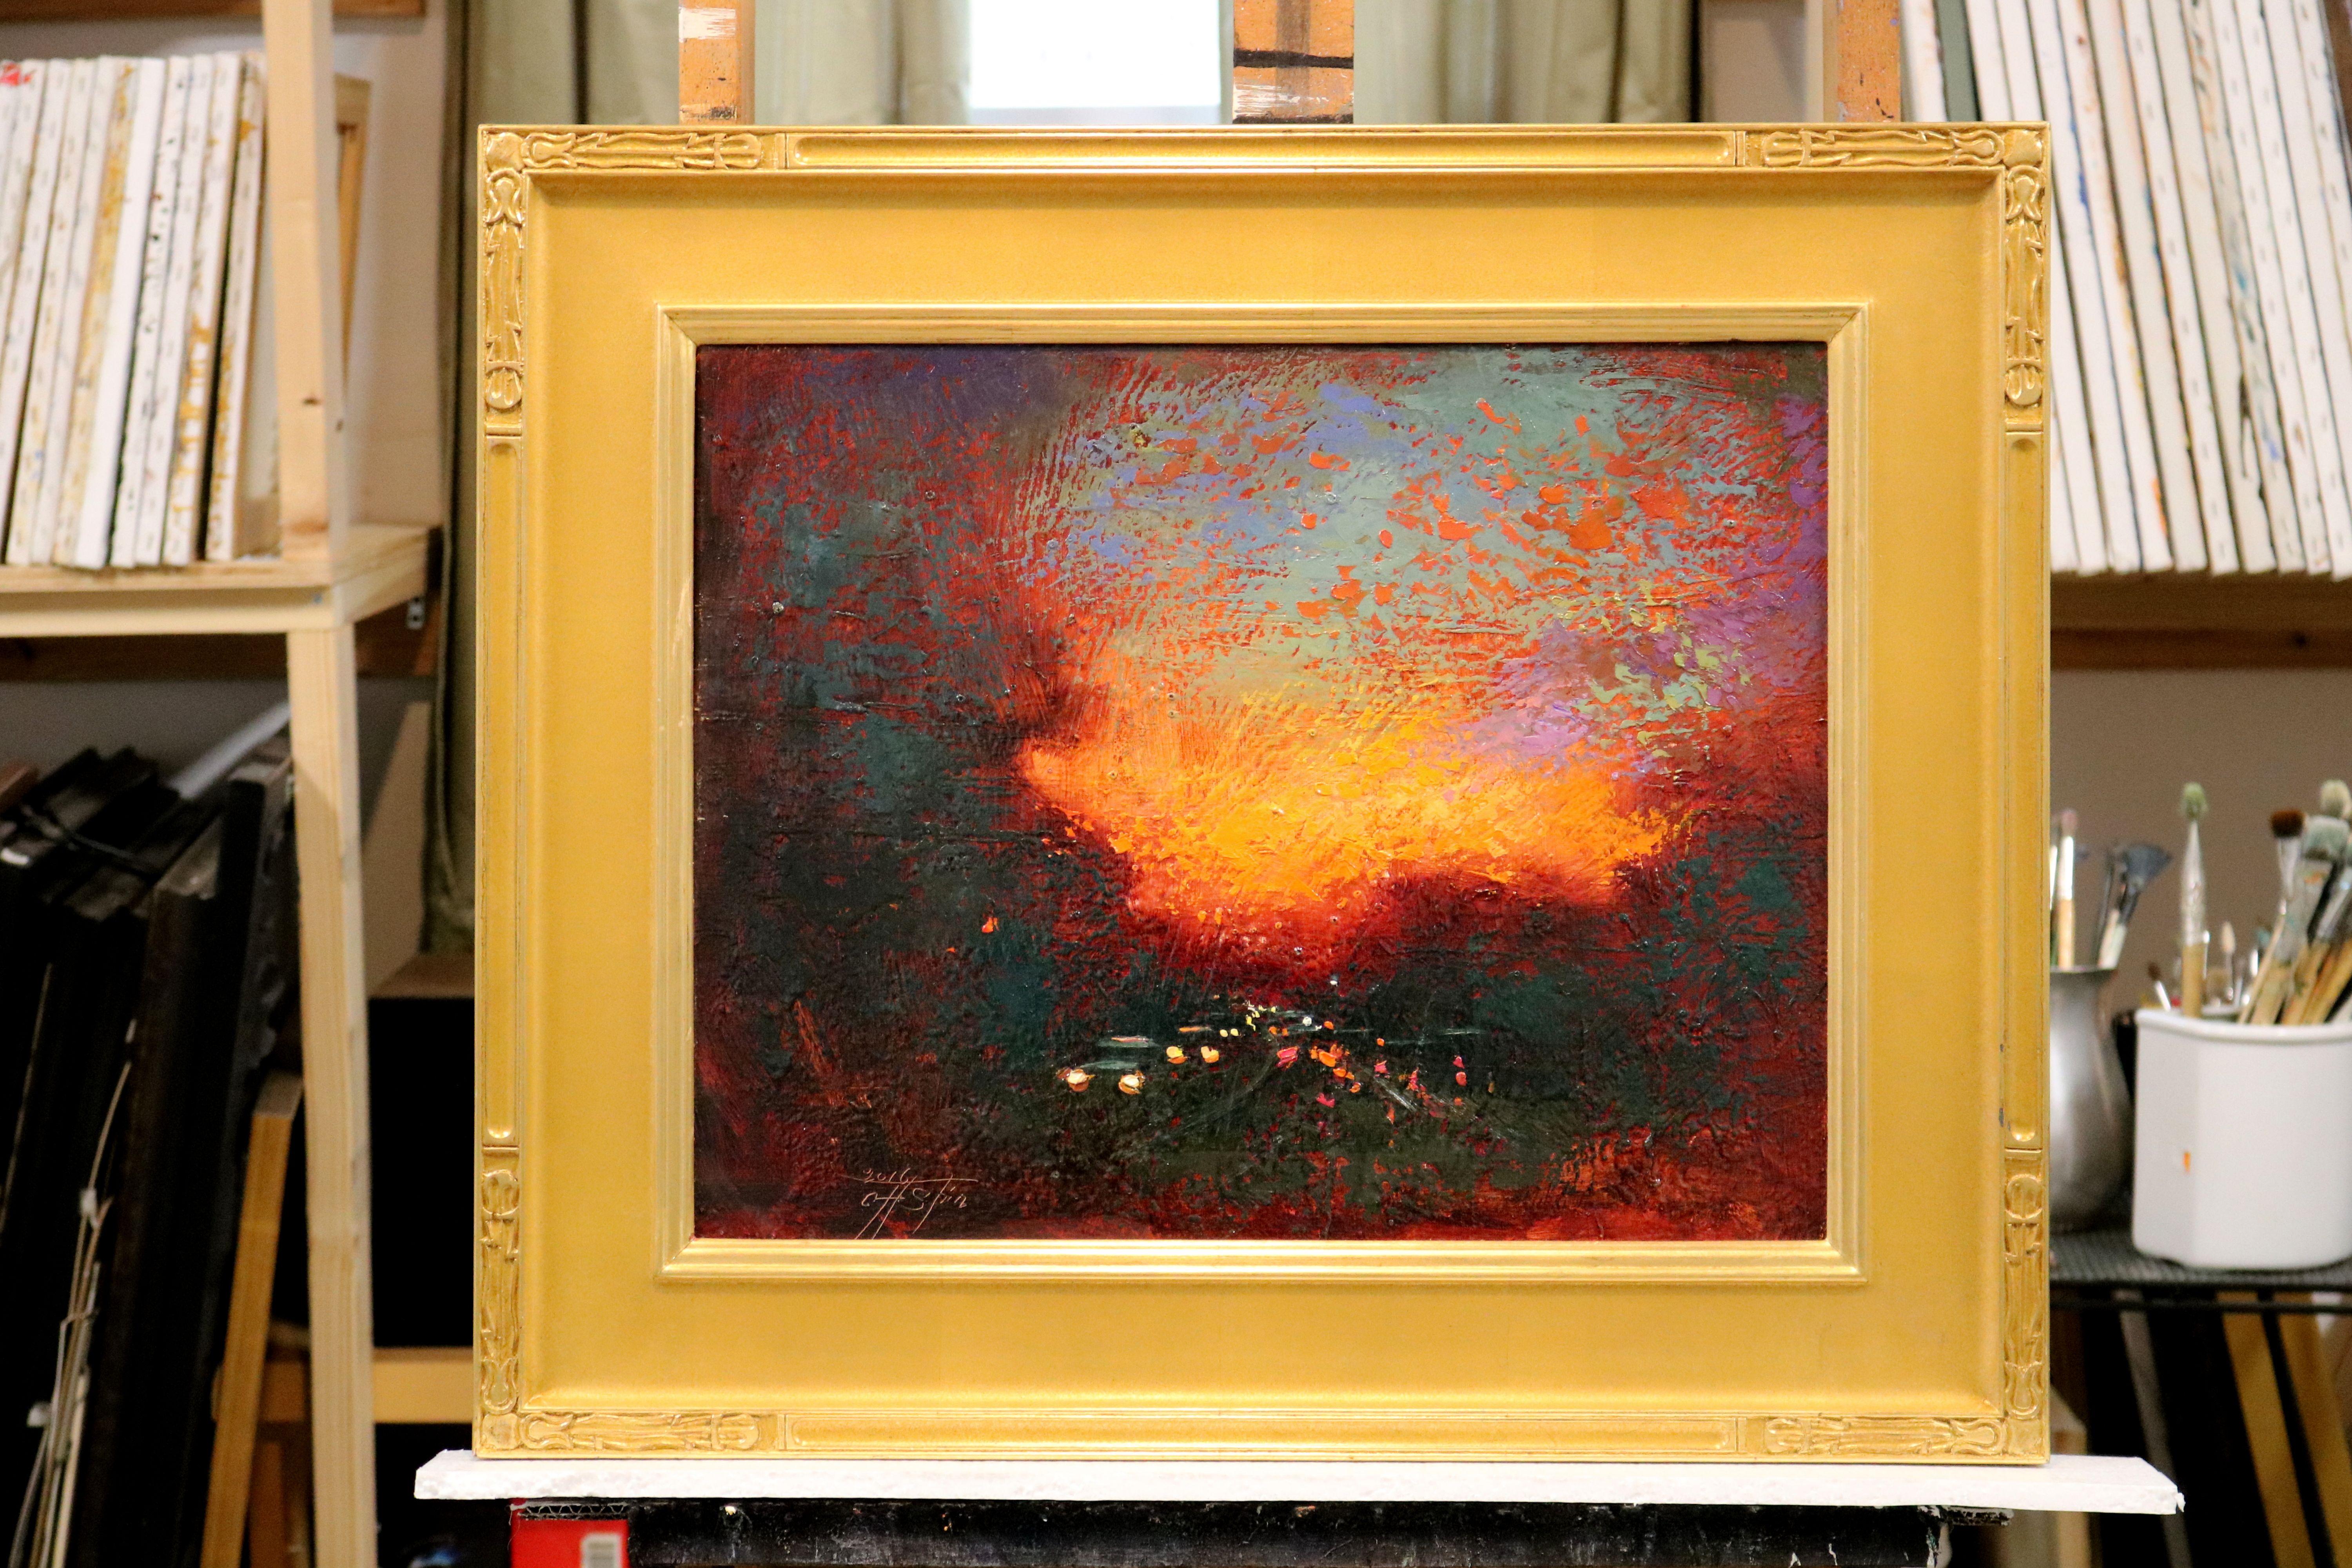 20 x 16 x 1 inches    from Neighbor in Long Island, NY    One of kind Original Oil painting    * Between Sunset and Twilight is always impressive but my goal is  to as much impact as possible with simplicity    * An attempt to develop new minimalism